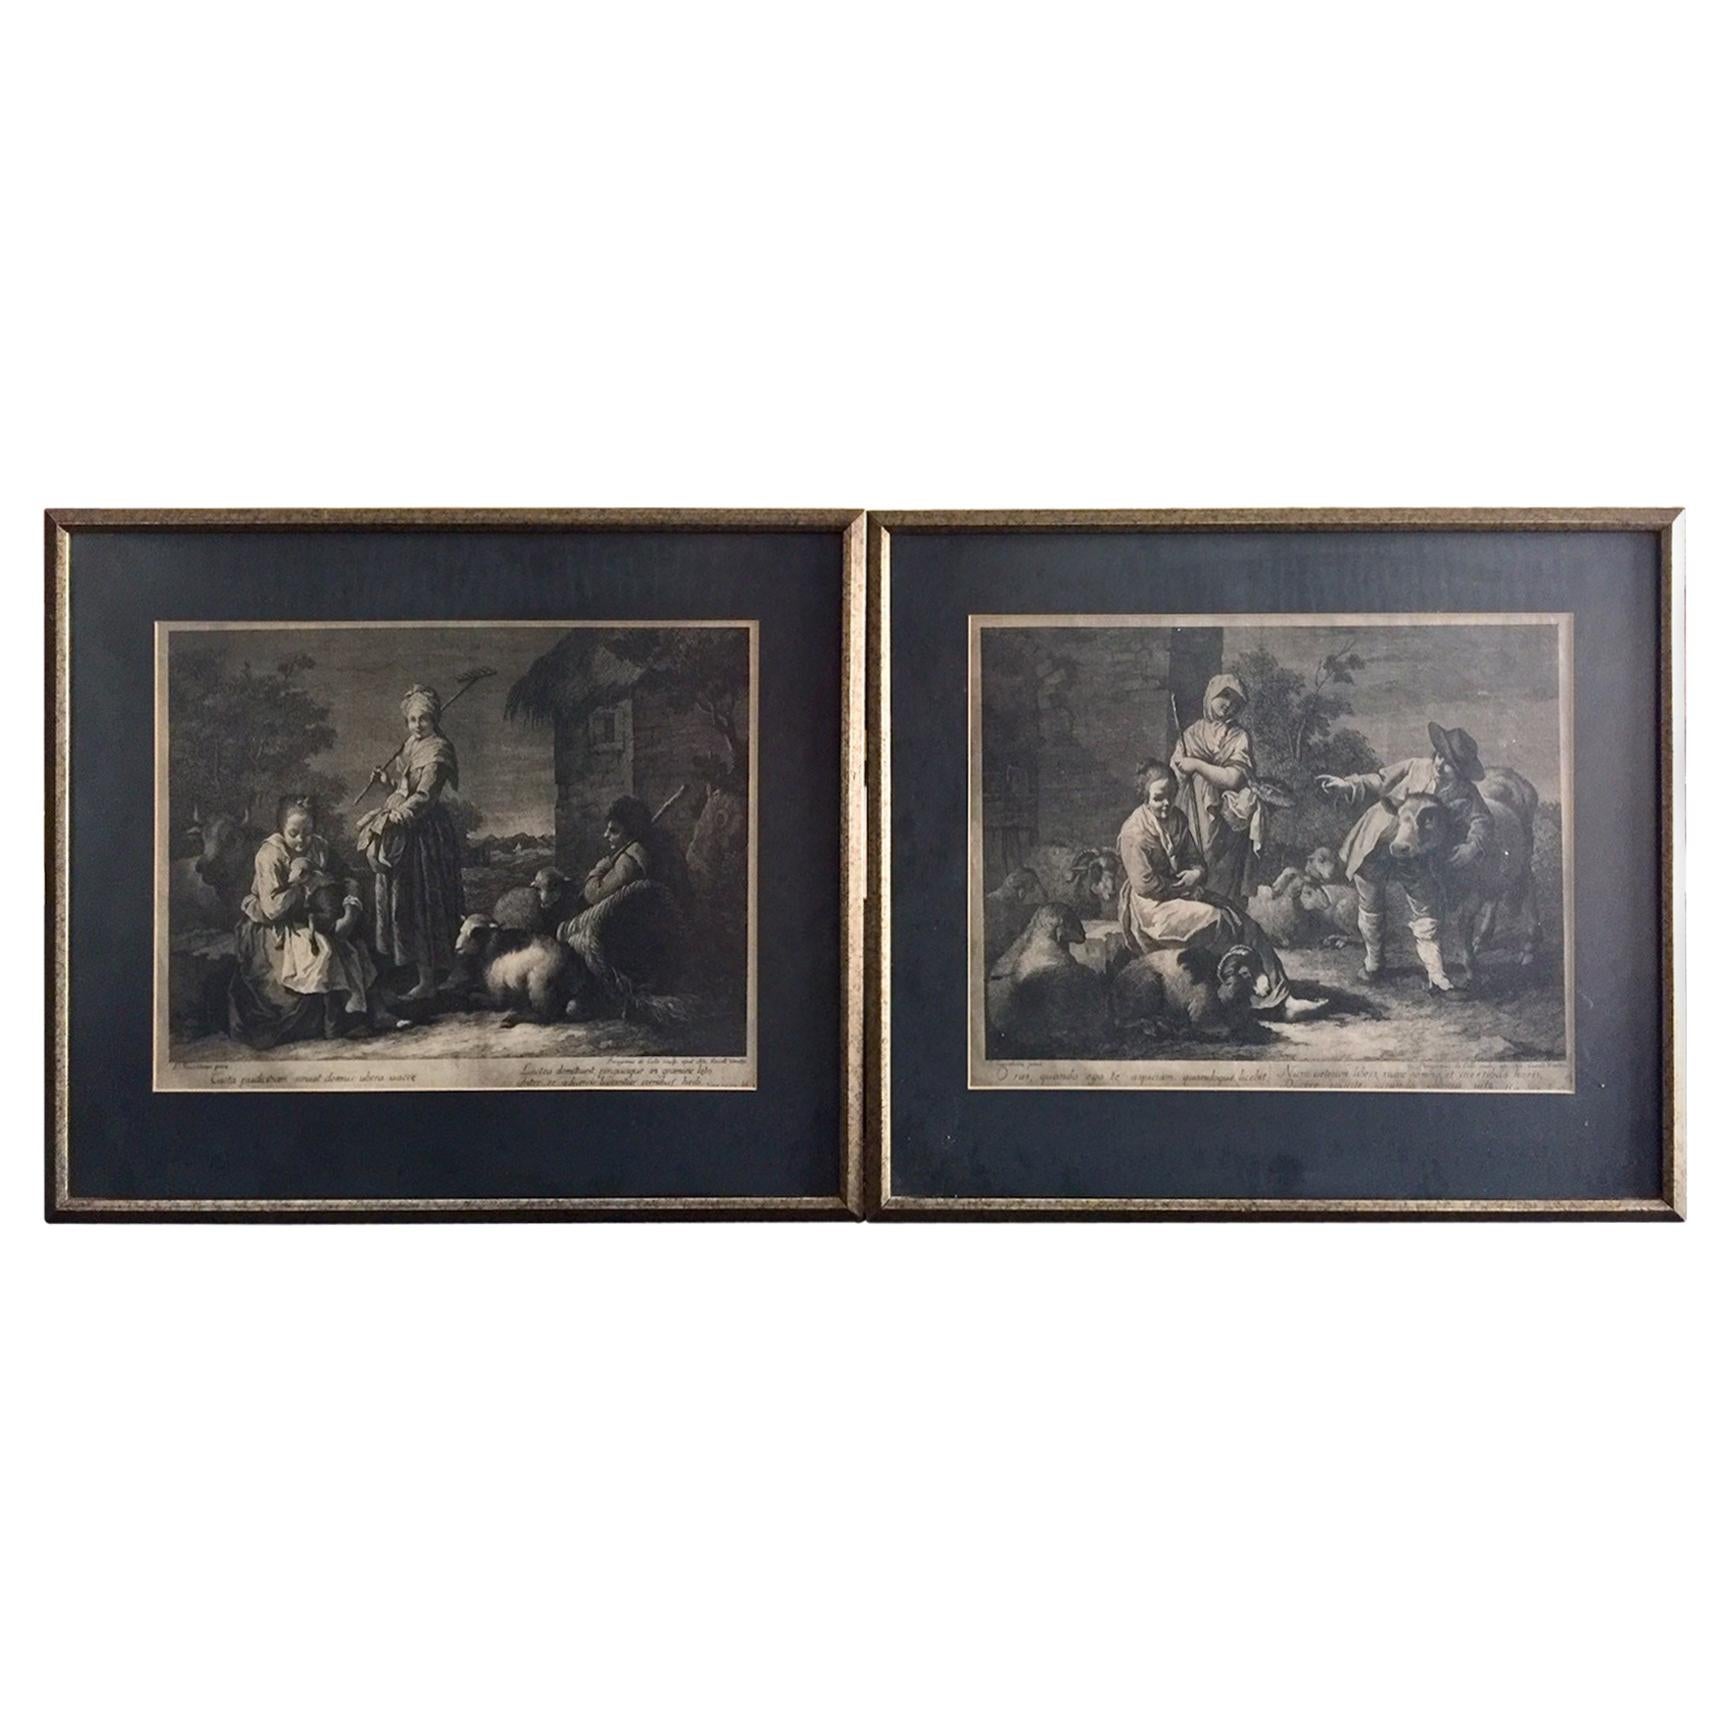 Pair of French Monochromatic Prints 'Etchings'